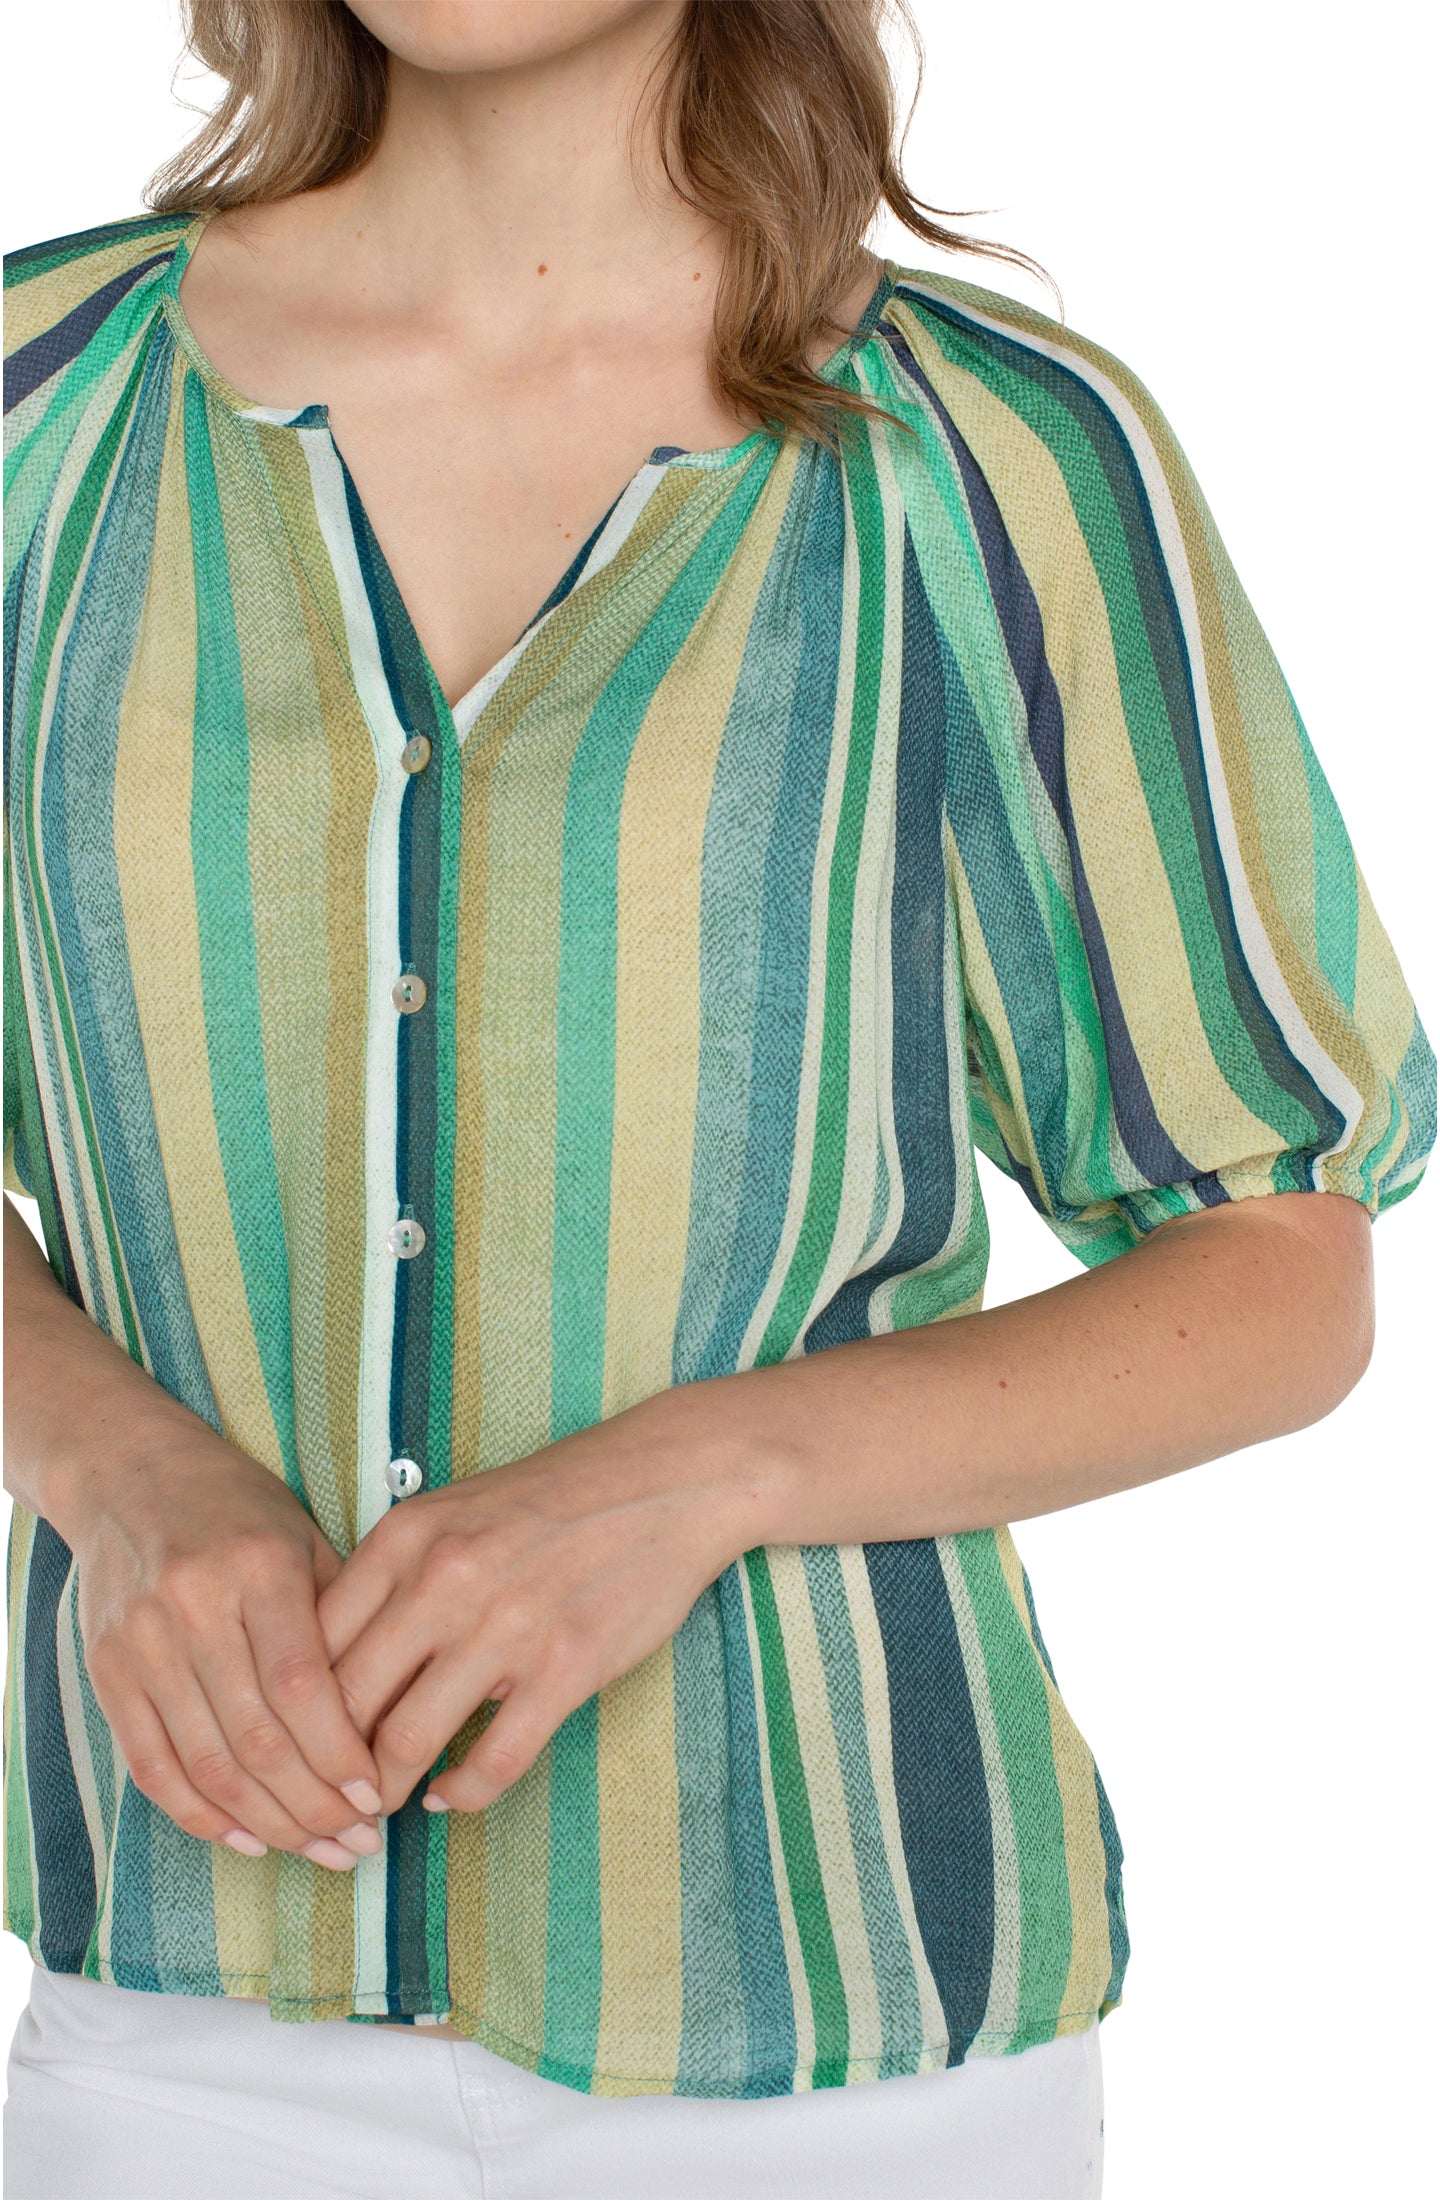 LVP Button Front Shirred Woven Blouse - Teal Multi Stripe Close Up View